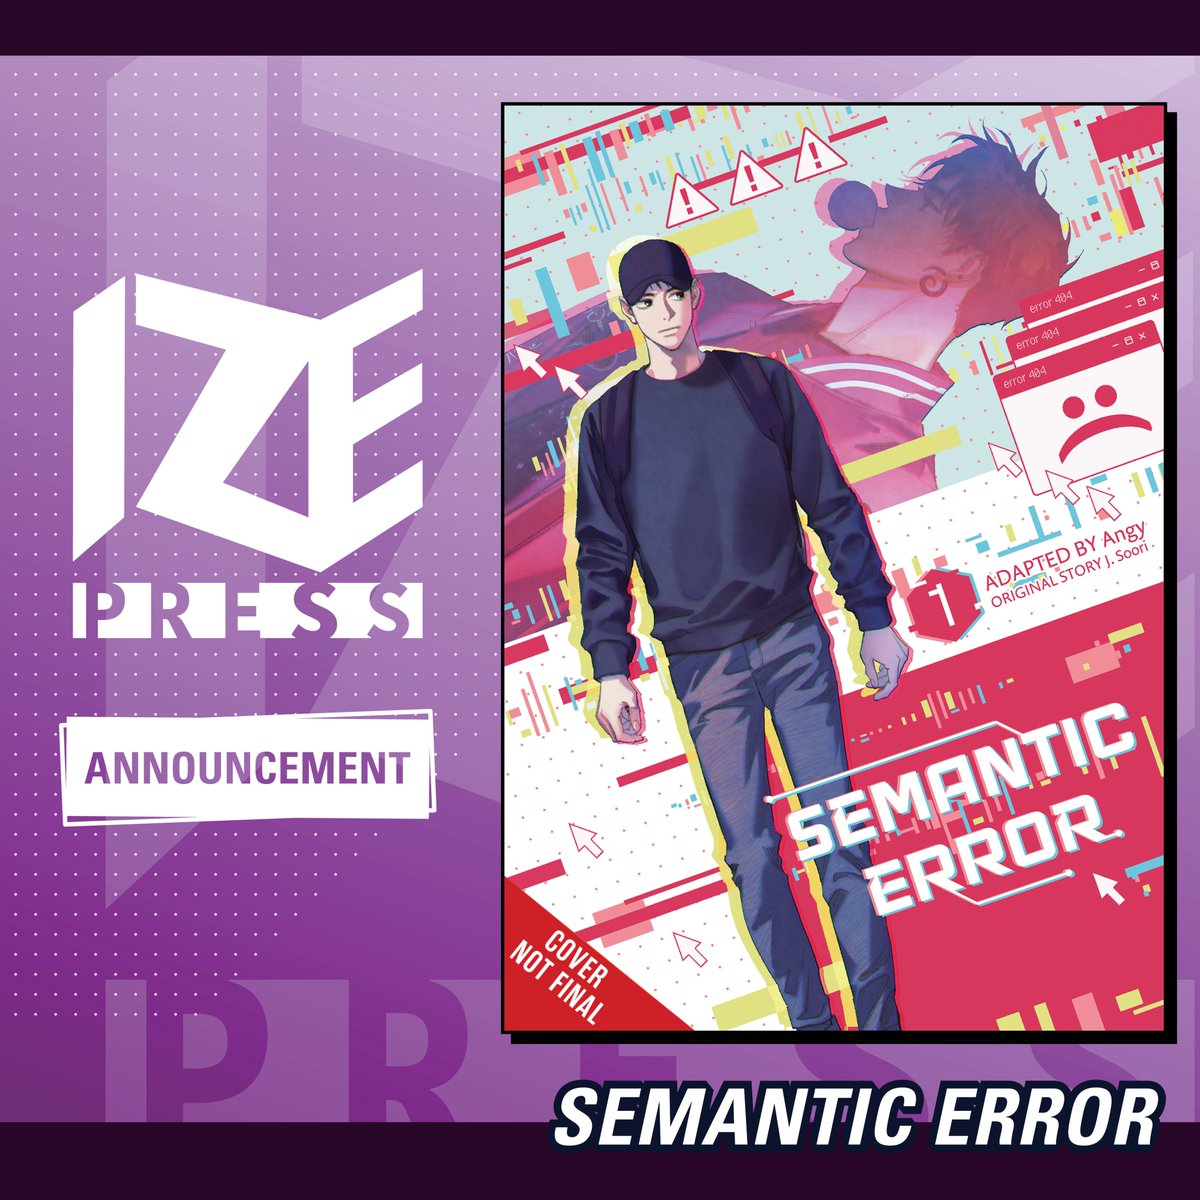 We've got some exciting news to share! 🙌

<Semantic Error> webcomic is coming to print, in partnership with @izepress ! Are you as excited as we are? 😝

#MantaComics #SemanticError #PrintEdition #Webcomic #IzePress